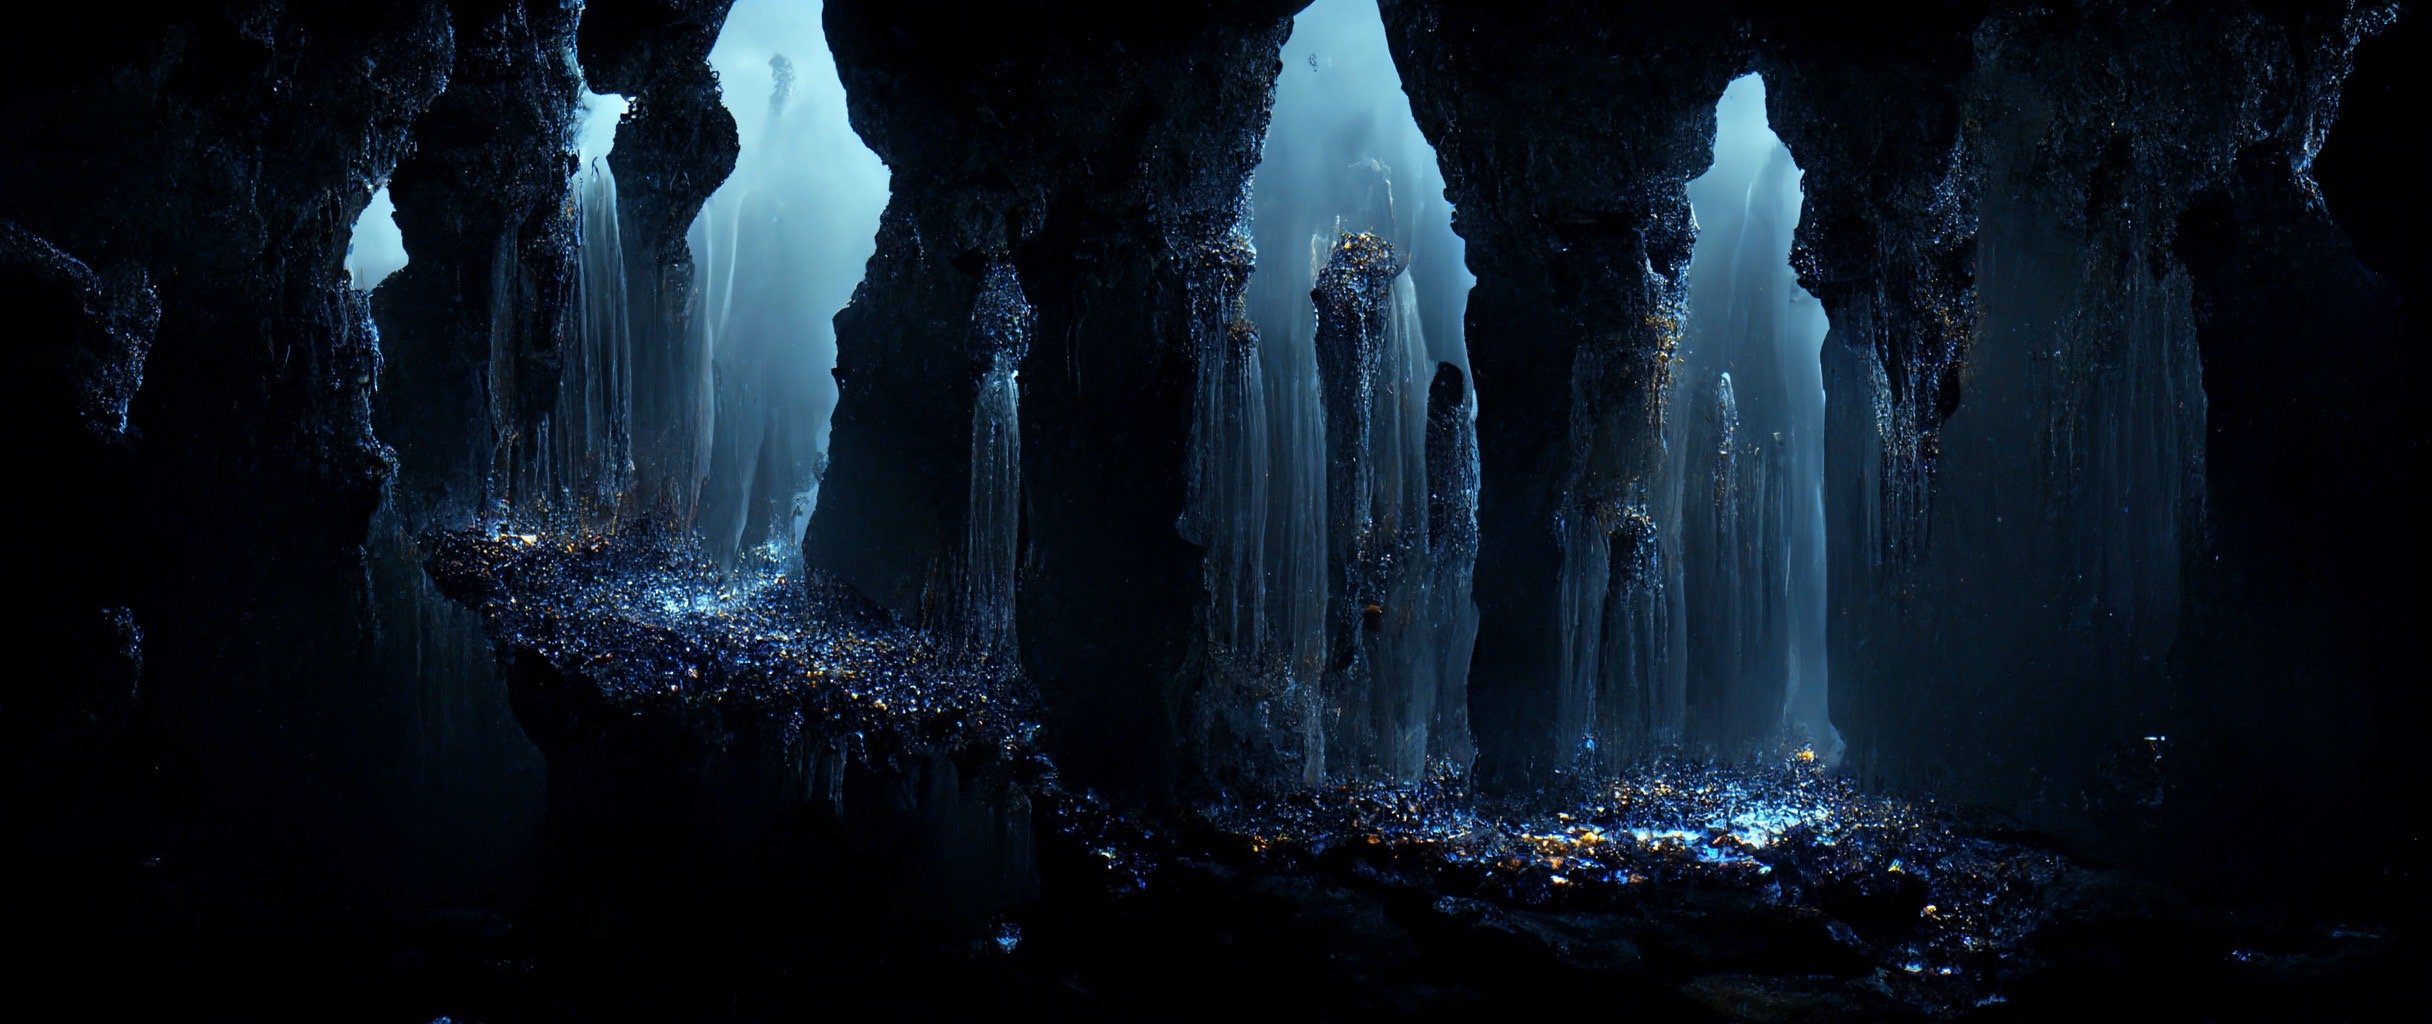 63faead5-ae11-4289-a529-4345afdd6434_S3RAPH_incredible_mystical_cave_filled_with_sapphires._Stalactites_and_stalagmites_dripping_with_liquid._ci.JPG